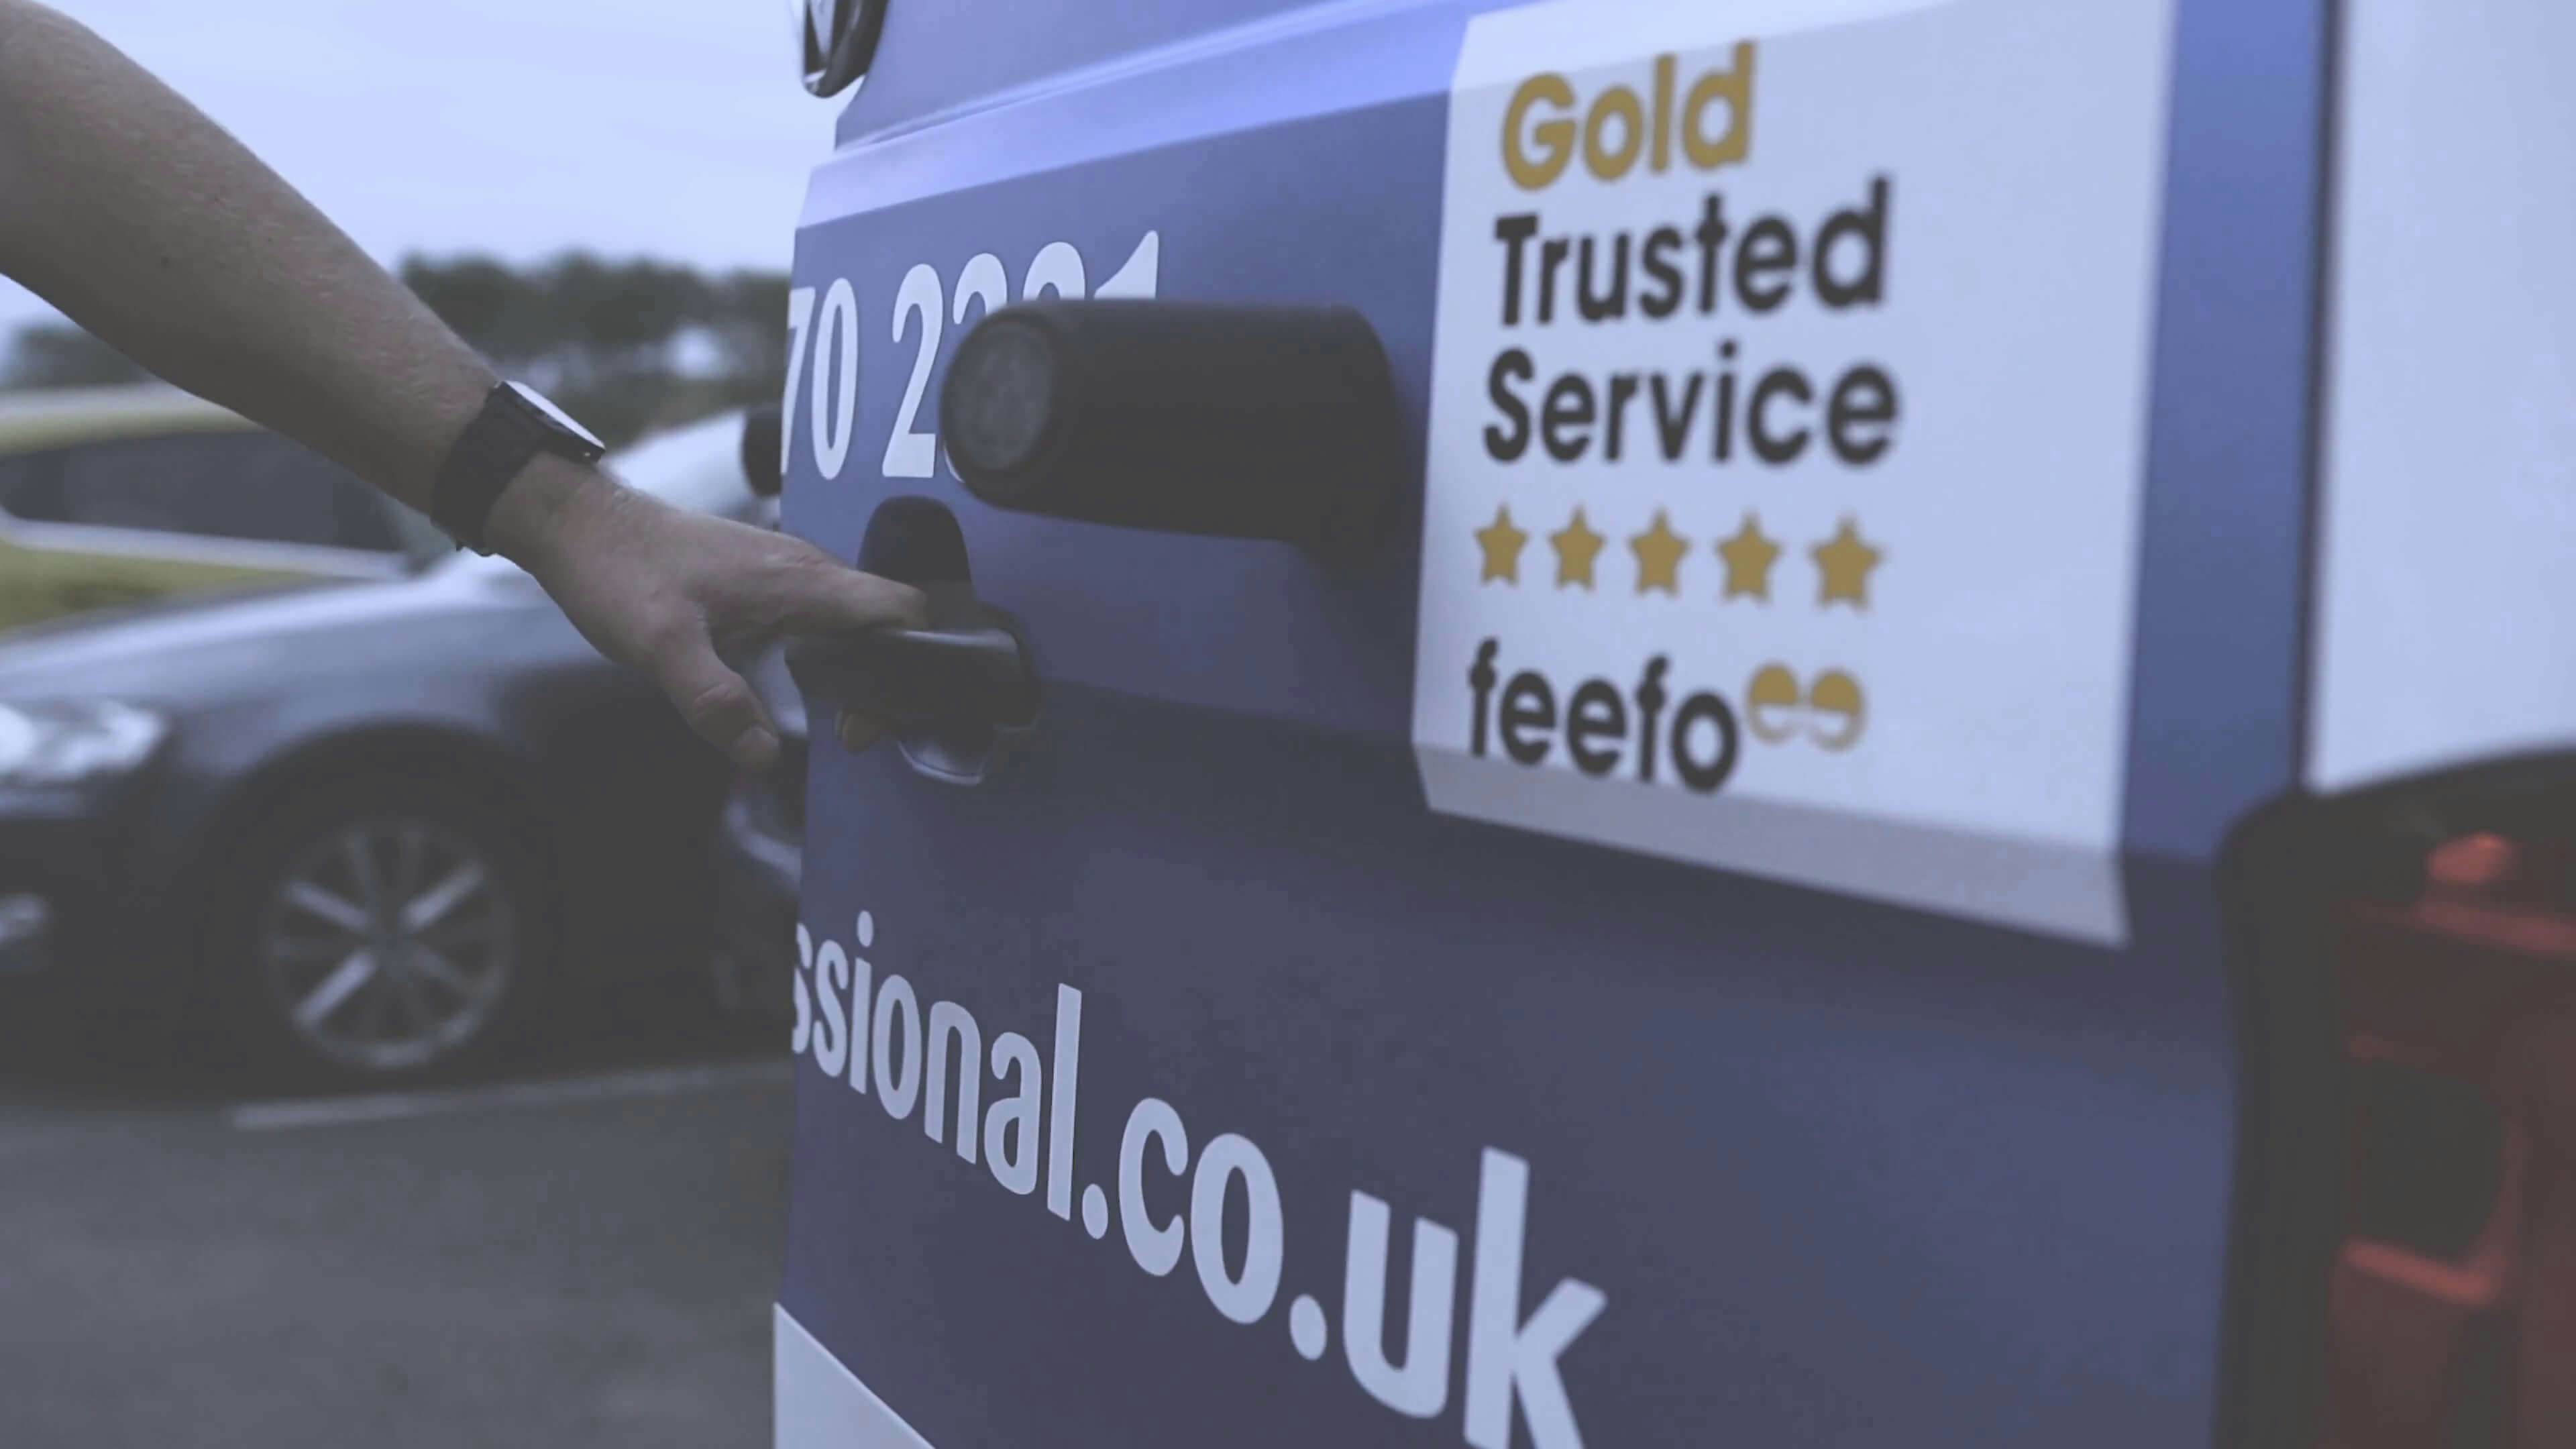 Forbes Professional Van Feefo Gold Trusted Service